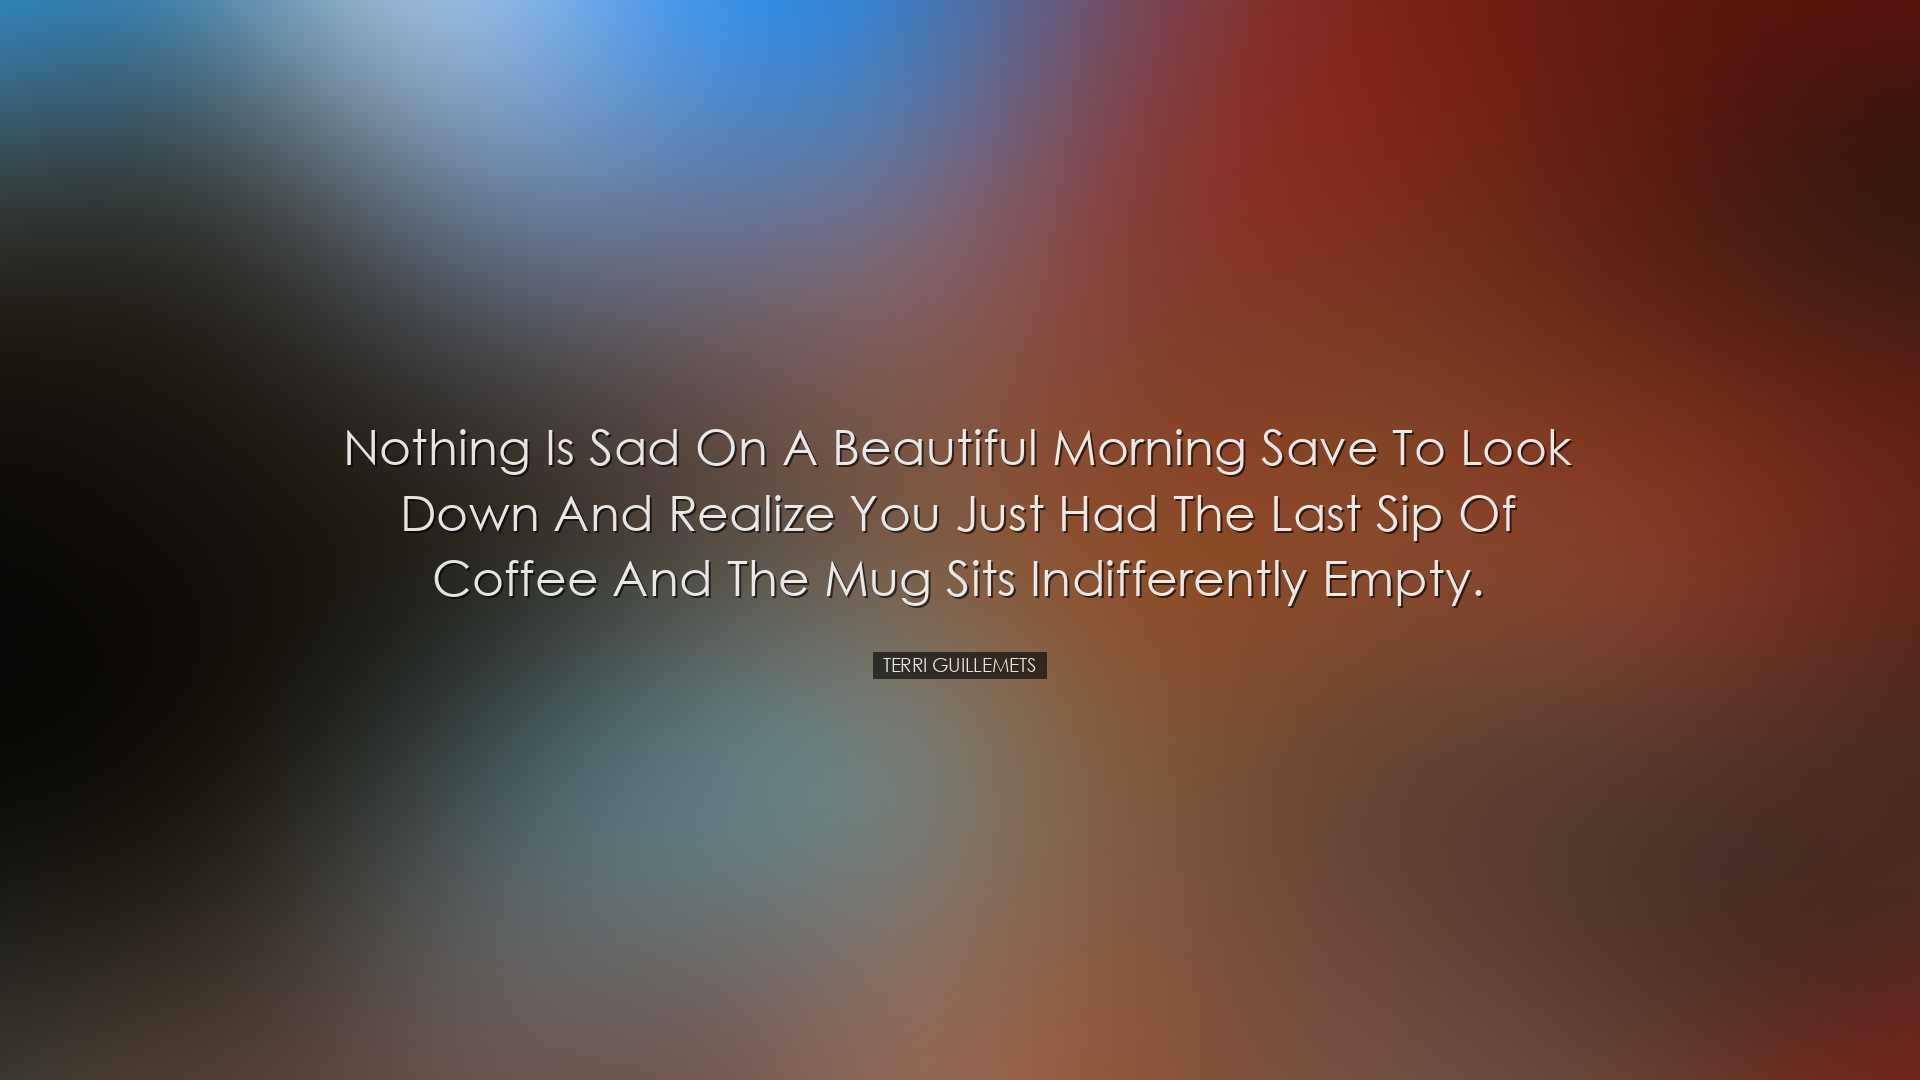 Nothing is sad on a beautiful morning save to look down and realiz